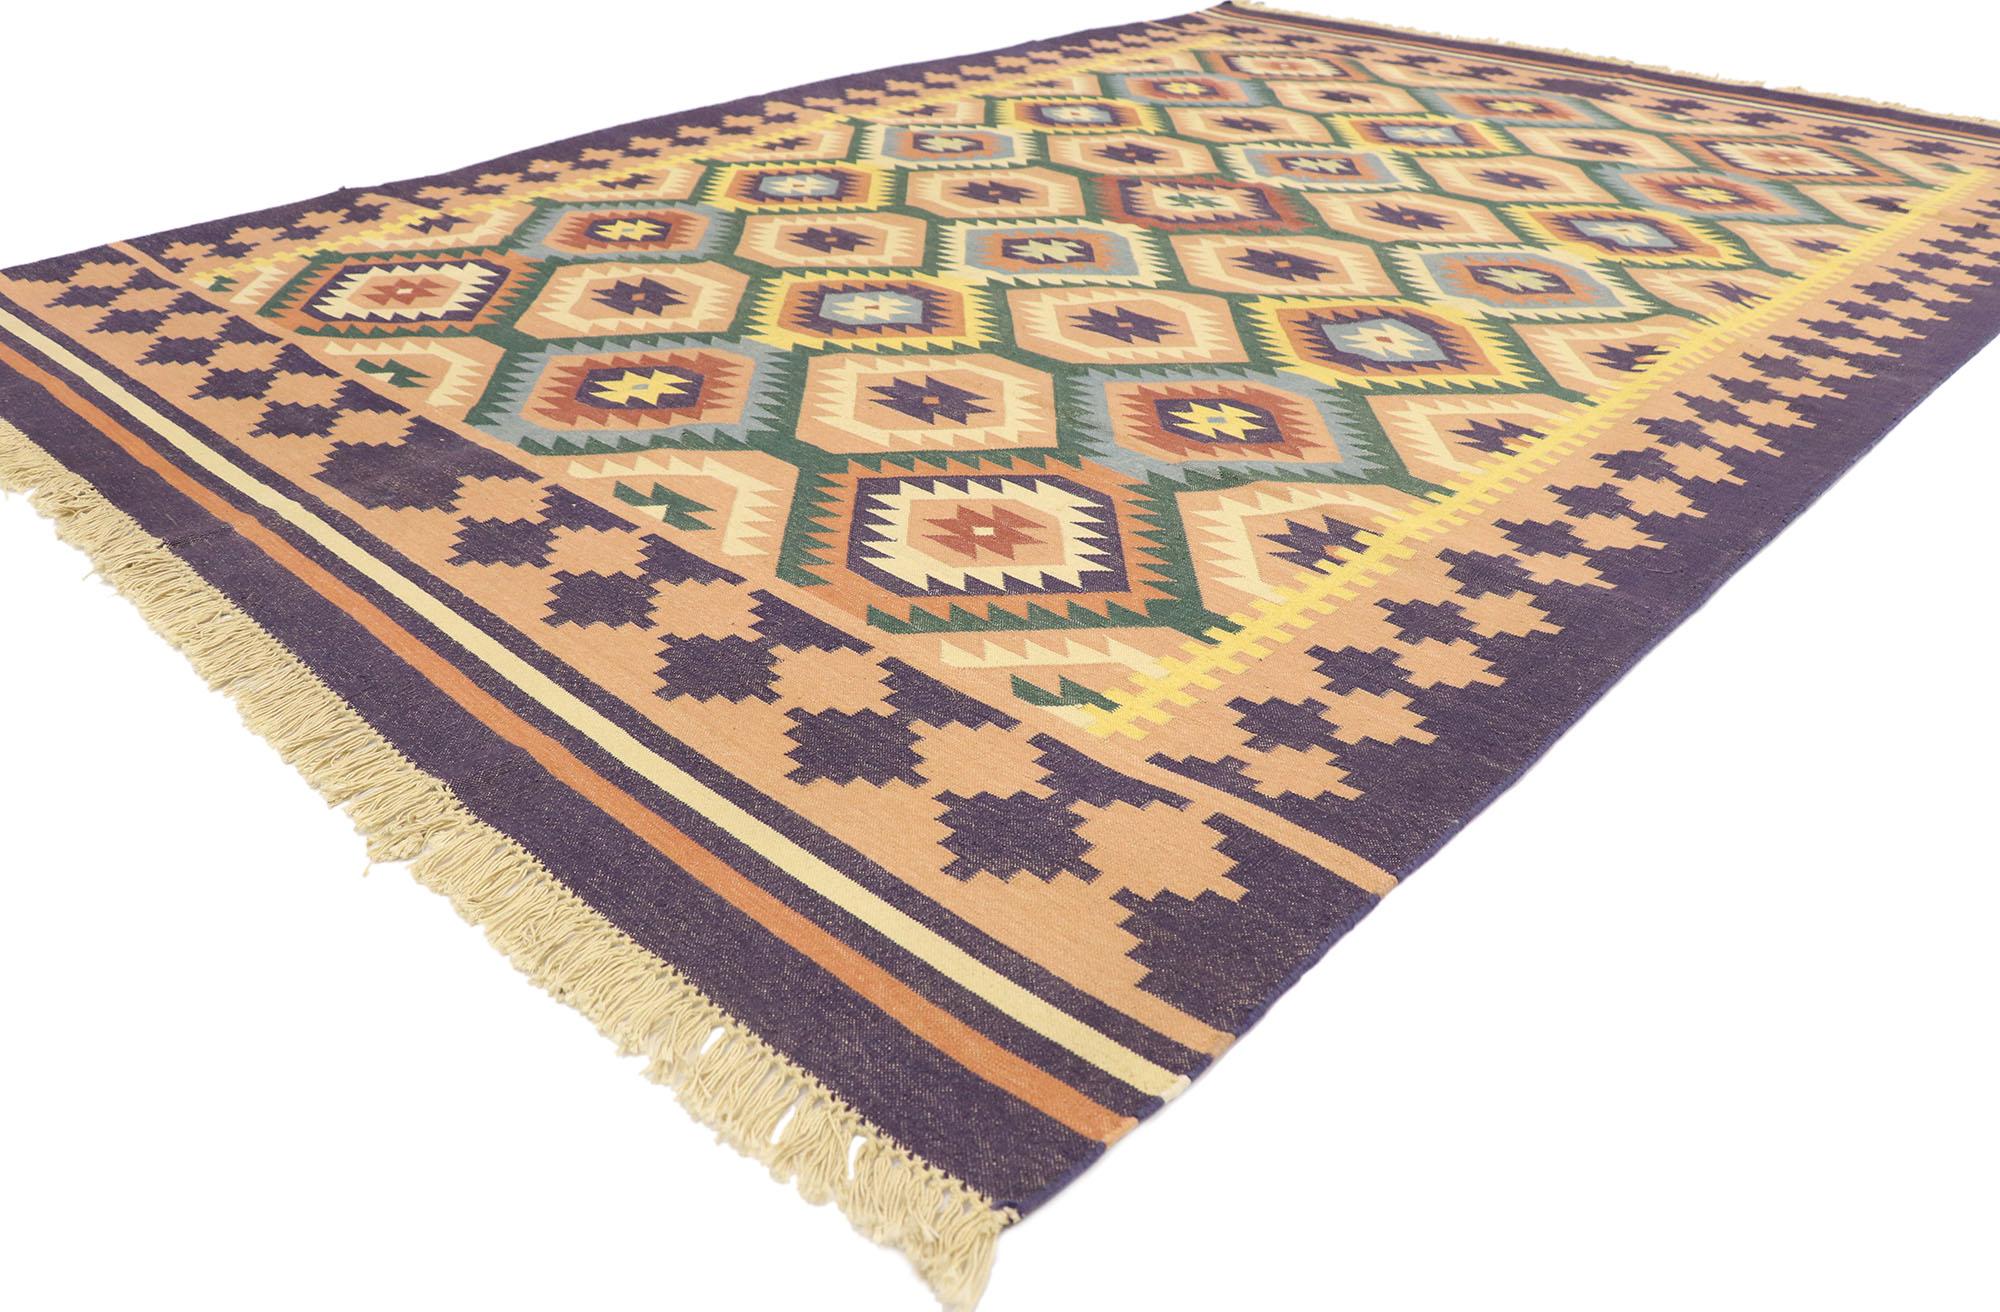 77957 vintage Afghan Maimana Kilim rug with Southwestern Tribal style 06'01 x 08'11. Full of tiny details and a bold expressive design combined with lively colors and tribal style, this hand-woven wool vintage Afghani Maimana kilim rug is a